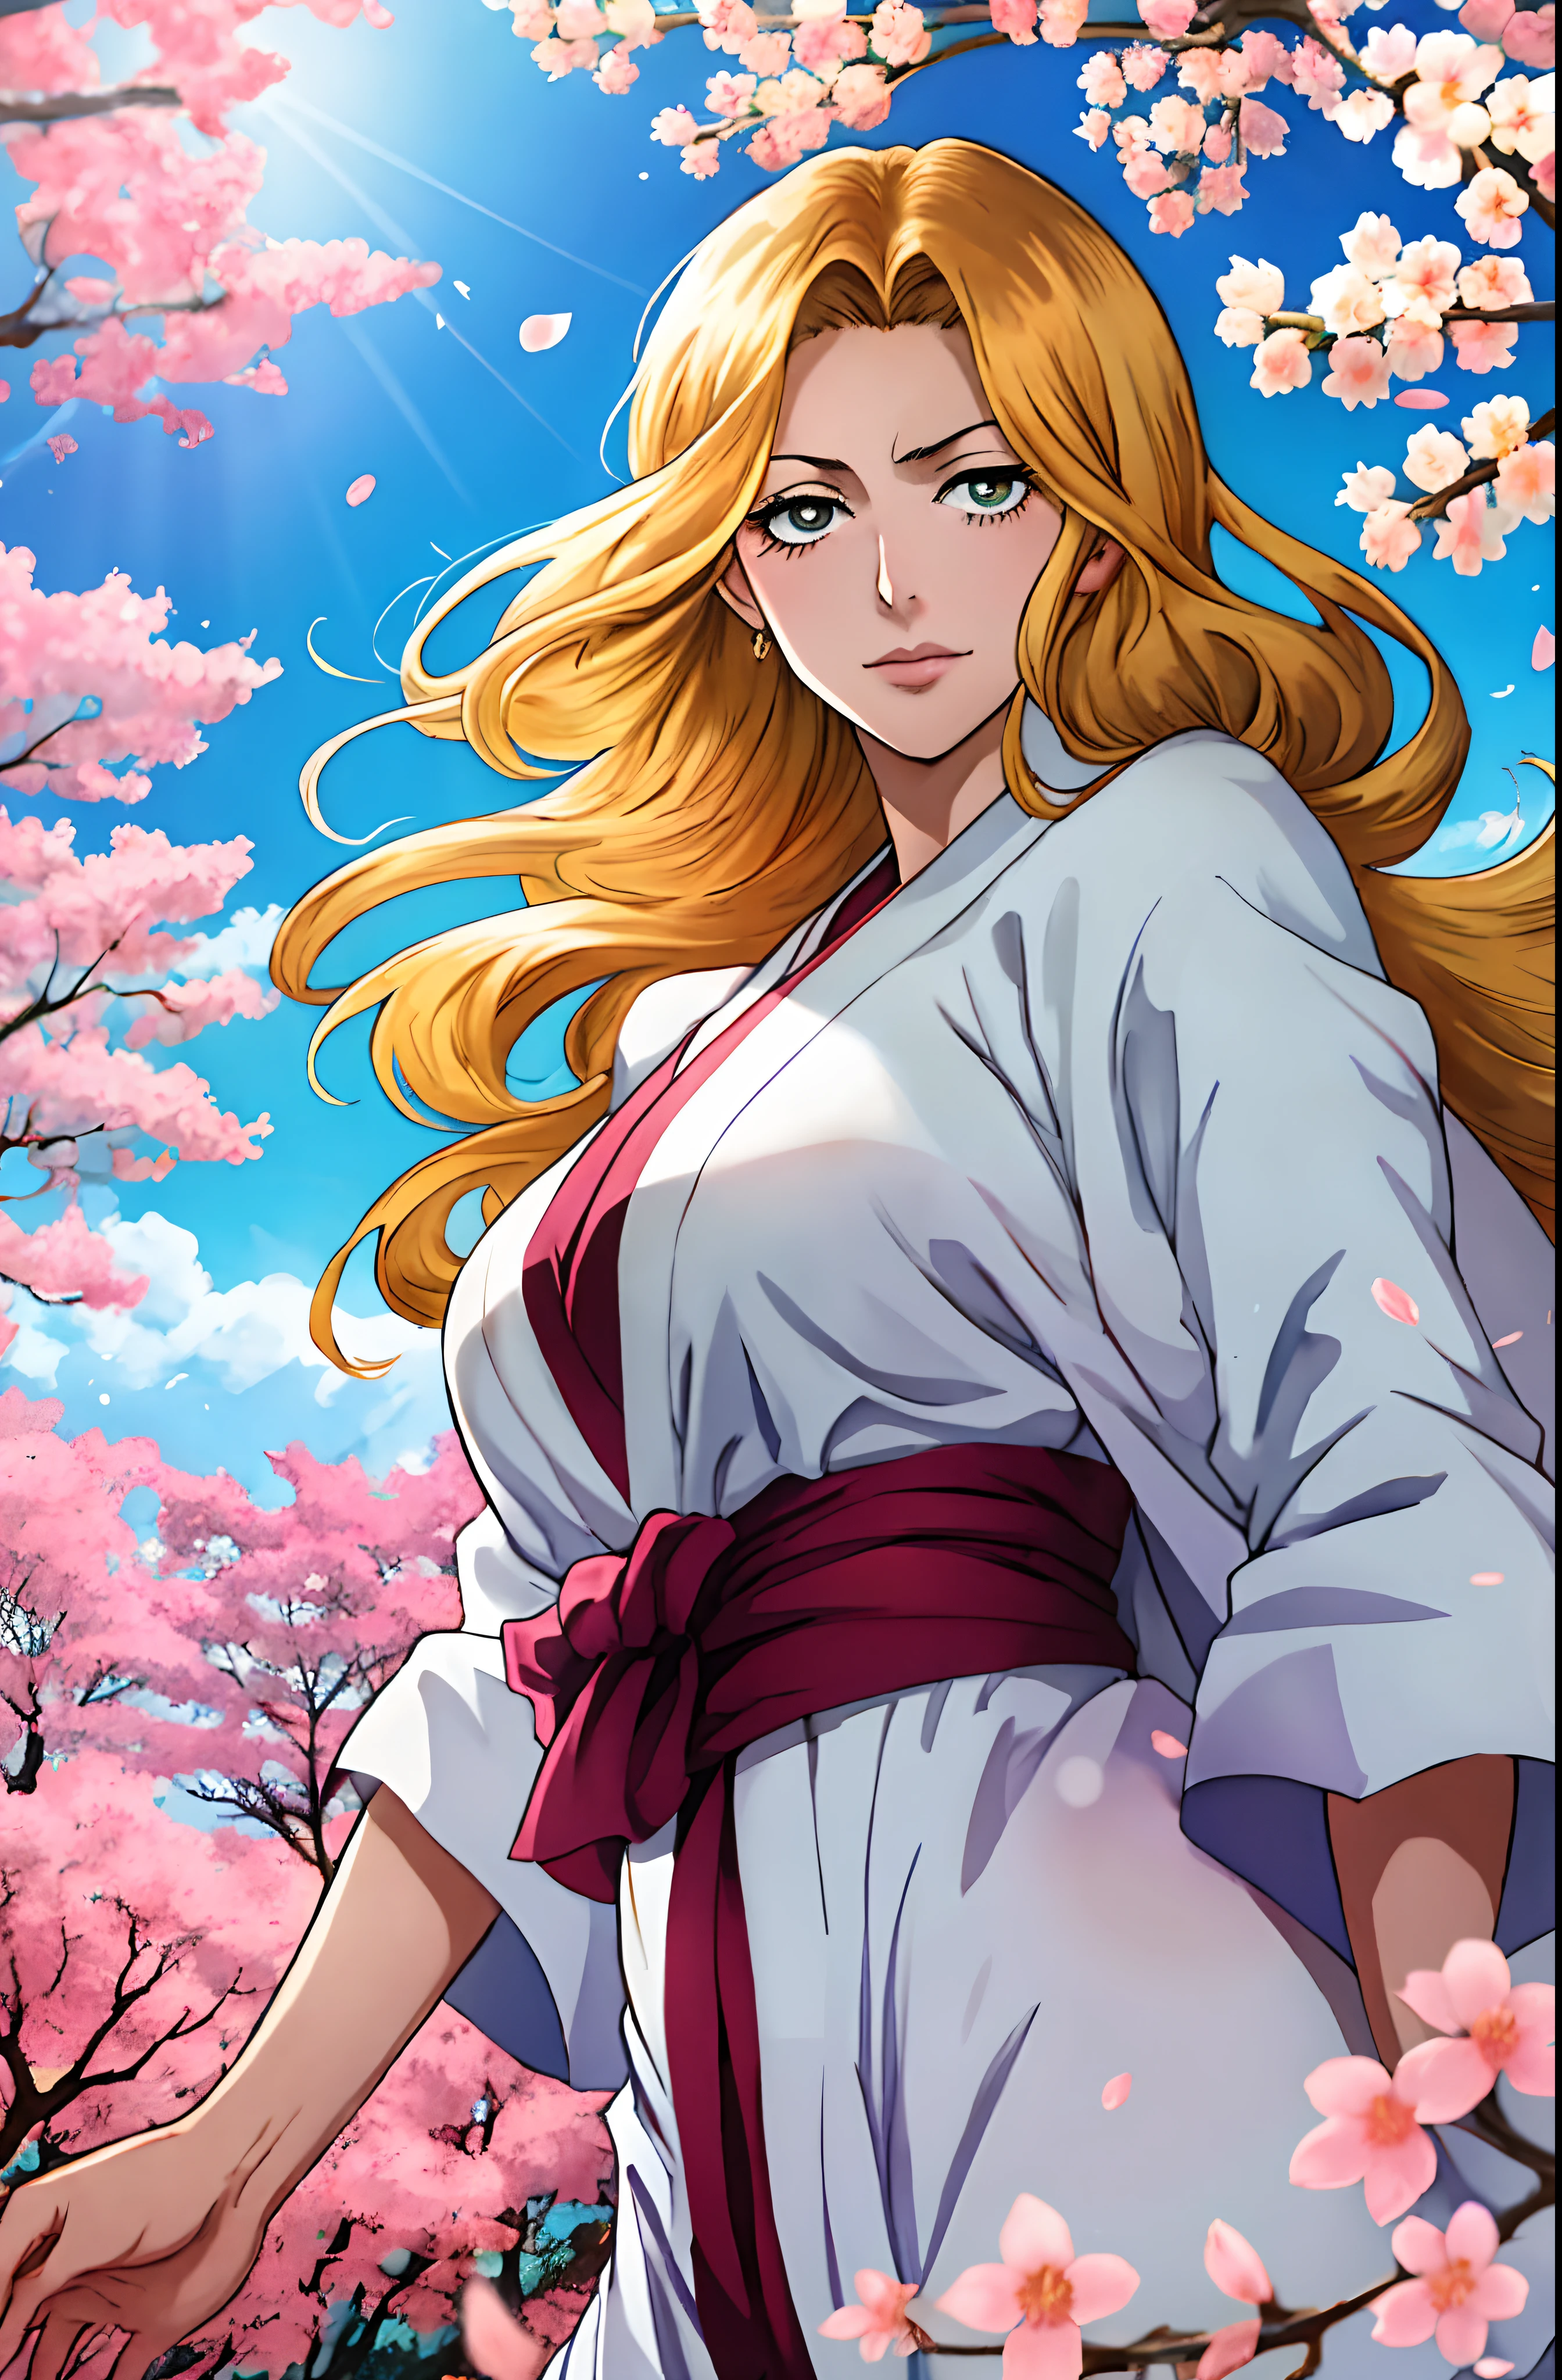 (masterpiece, colorful manga-style illustration:1.3), (captivating portrayal of the character Rangiku Matsumoto from the anime "Bleach" by Tite Kubo:1.2), (digitally illustrated to capture the manga's aesthetic:1.2), (Rangiku Matsumoto depicted in a serene cherry blossom forest:1.1), (vibrant colors and dynamic lines reminiscent of manga artwork:1.1), (her distinct appearance and personality shining through:1.1), (surrounded by blooming cherry blossoms that enhance the scene's beauty:1.1), (intricate details in her attire, hair, and surroundings:1.1), (an illustration that pays homage to the anime's iconic characters:1.1), (the fusion of character and environment in a single frame:1.1), (a snapshot capturing the ethereal allure of Rangiku Matsumoto within the enchanting forest:1.1)). Effect: "Volume and natural lighting", "depth of field", "ISO 85%", "great shutter aperture", "better shutter speed", "great exposure", "great sharpness", "anti-aliasing" , "great RAW camera", "great curves and lighting levels", "great sharpness", "better High Pass Filter", "better Guassian Blur filter", "Better unsharp mask for depth of field effect and detail enhancement ", "(octane rendering)", "realism shading", "professional focus mode", "professional post production", "Fujifilm XT3 Film Grain", "smoothness:1.2", "edge smoothness", "coherent colors", "saturation +14%"